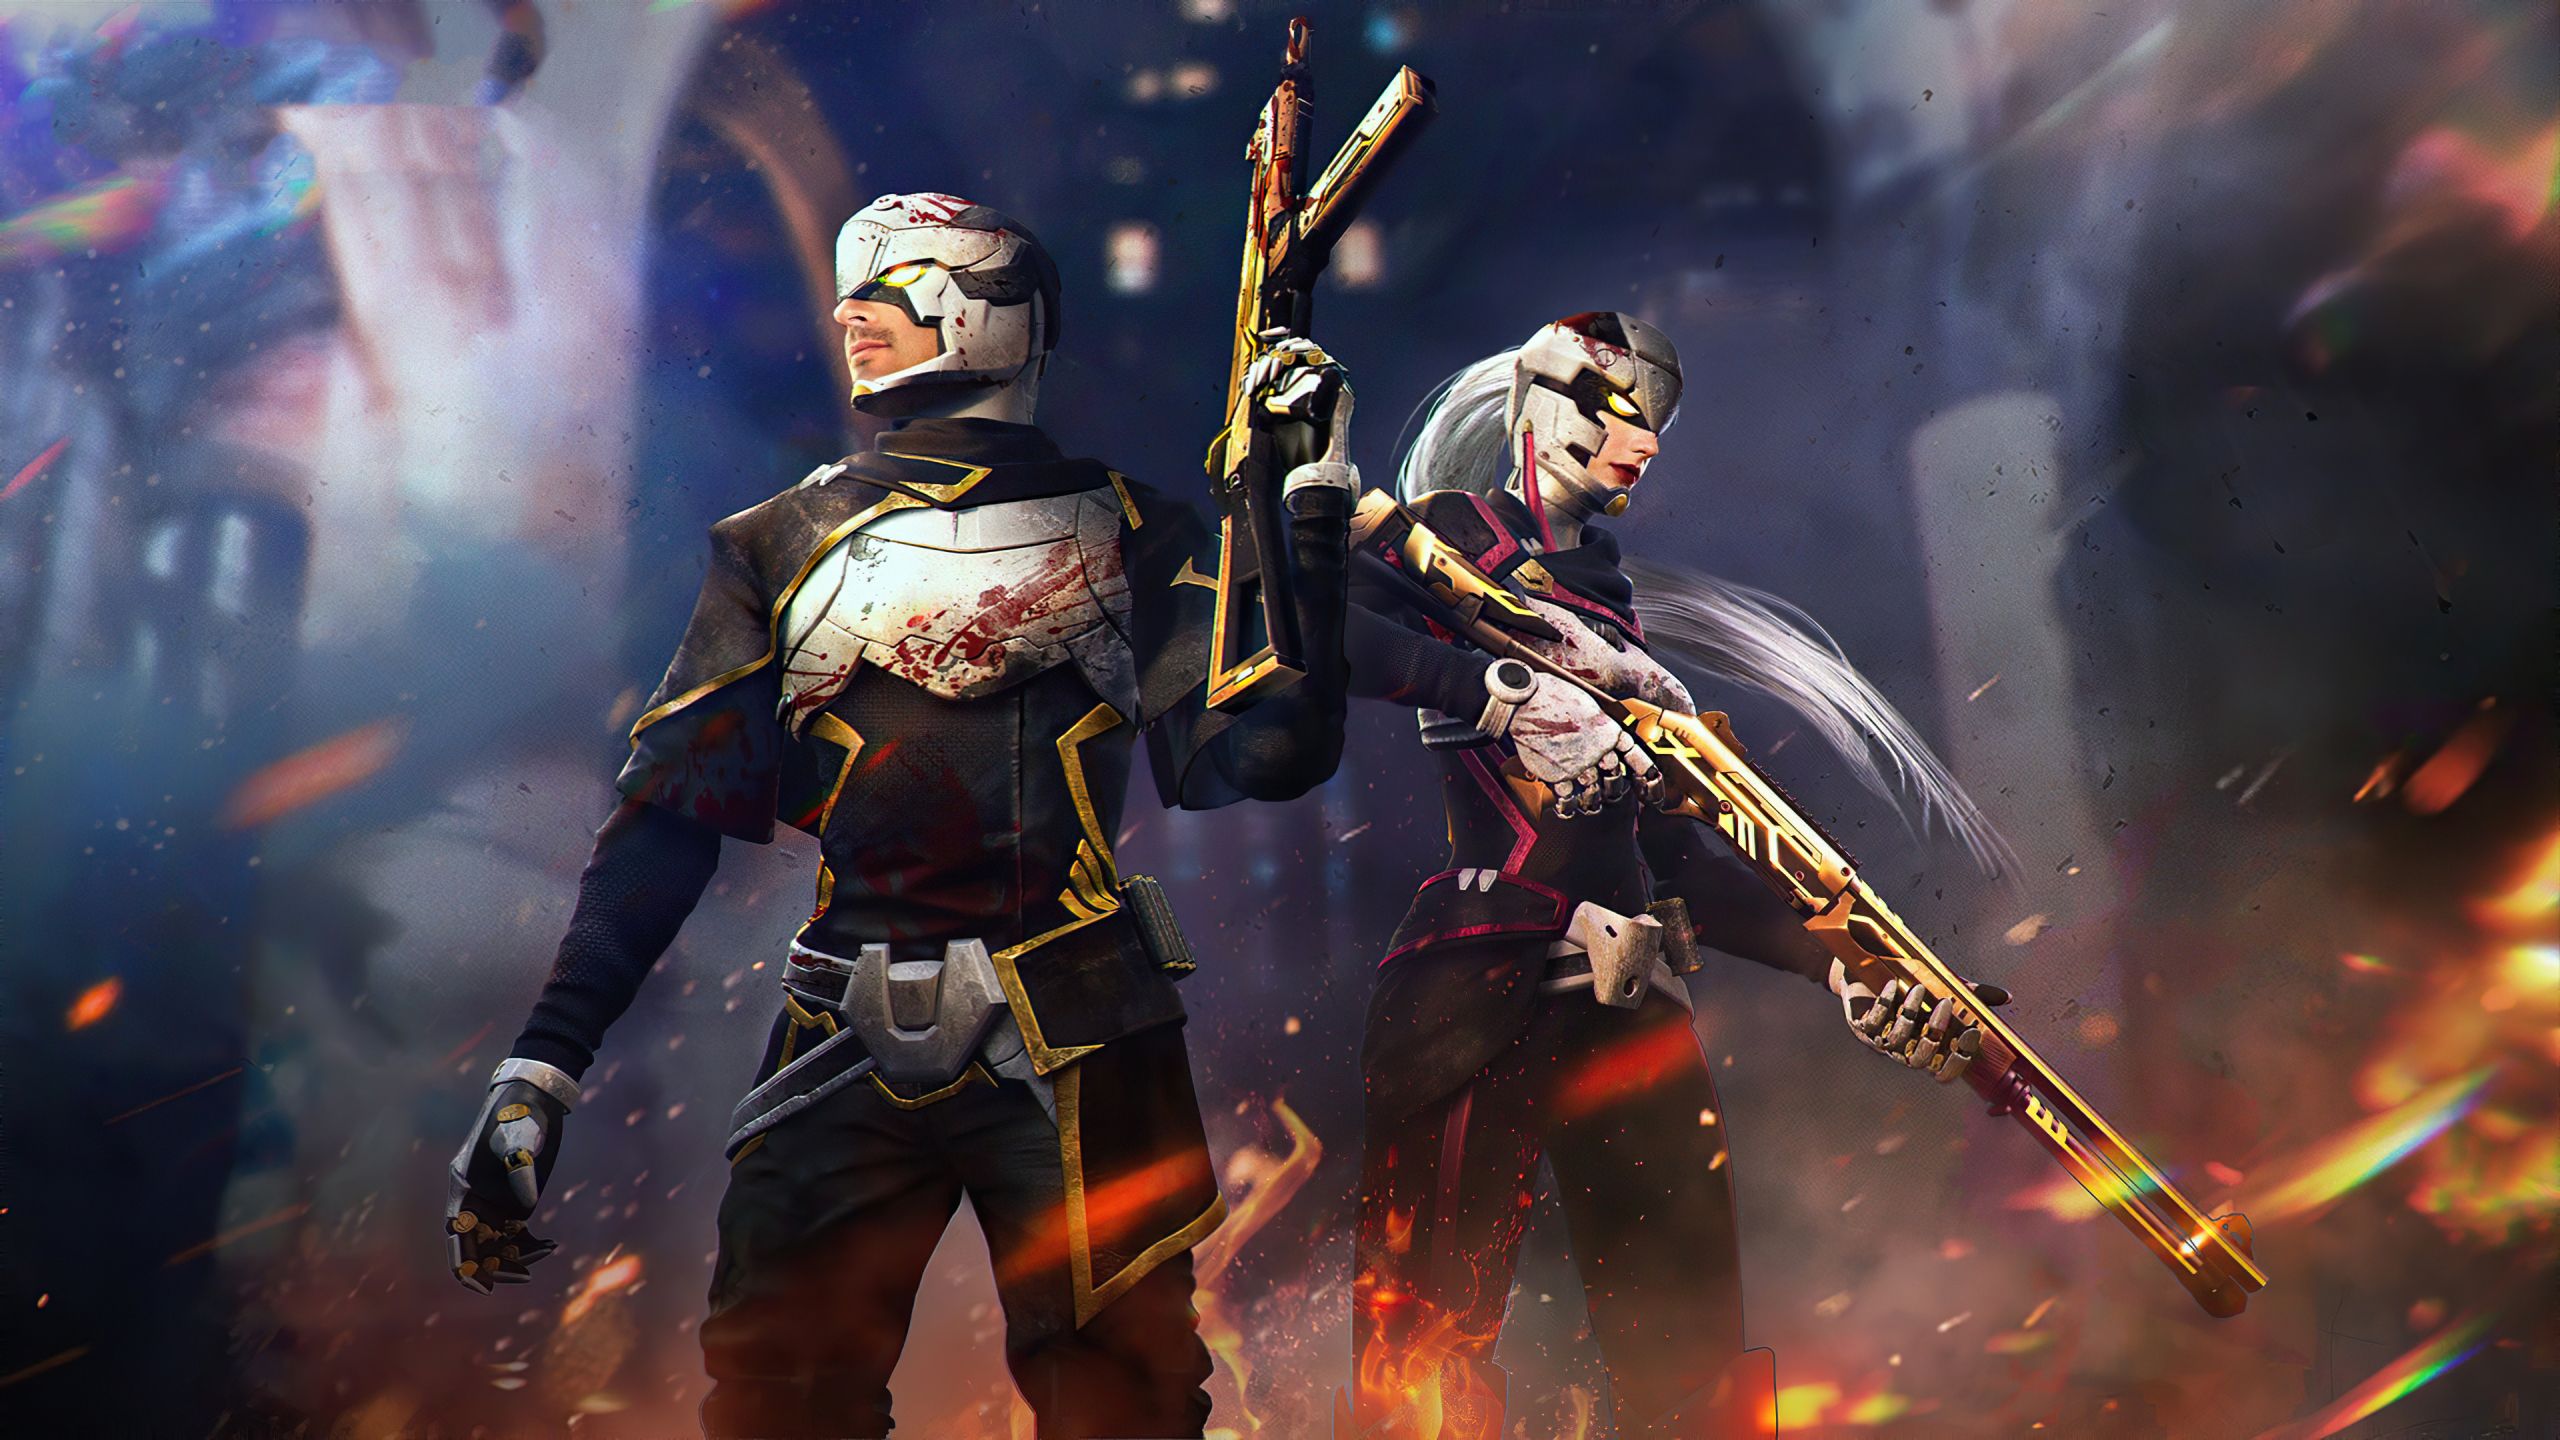 Garena Free Fire 2020 1440P Resolution Wallpaper, HD Games 4K Wallpaper, Image, Photo and Background